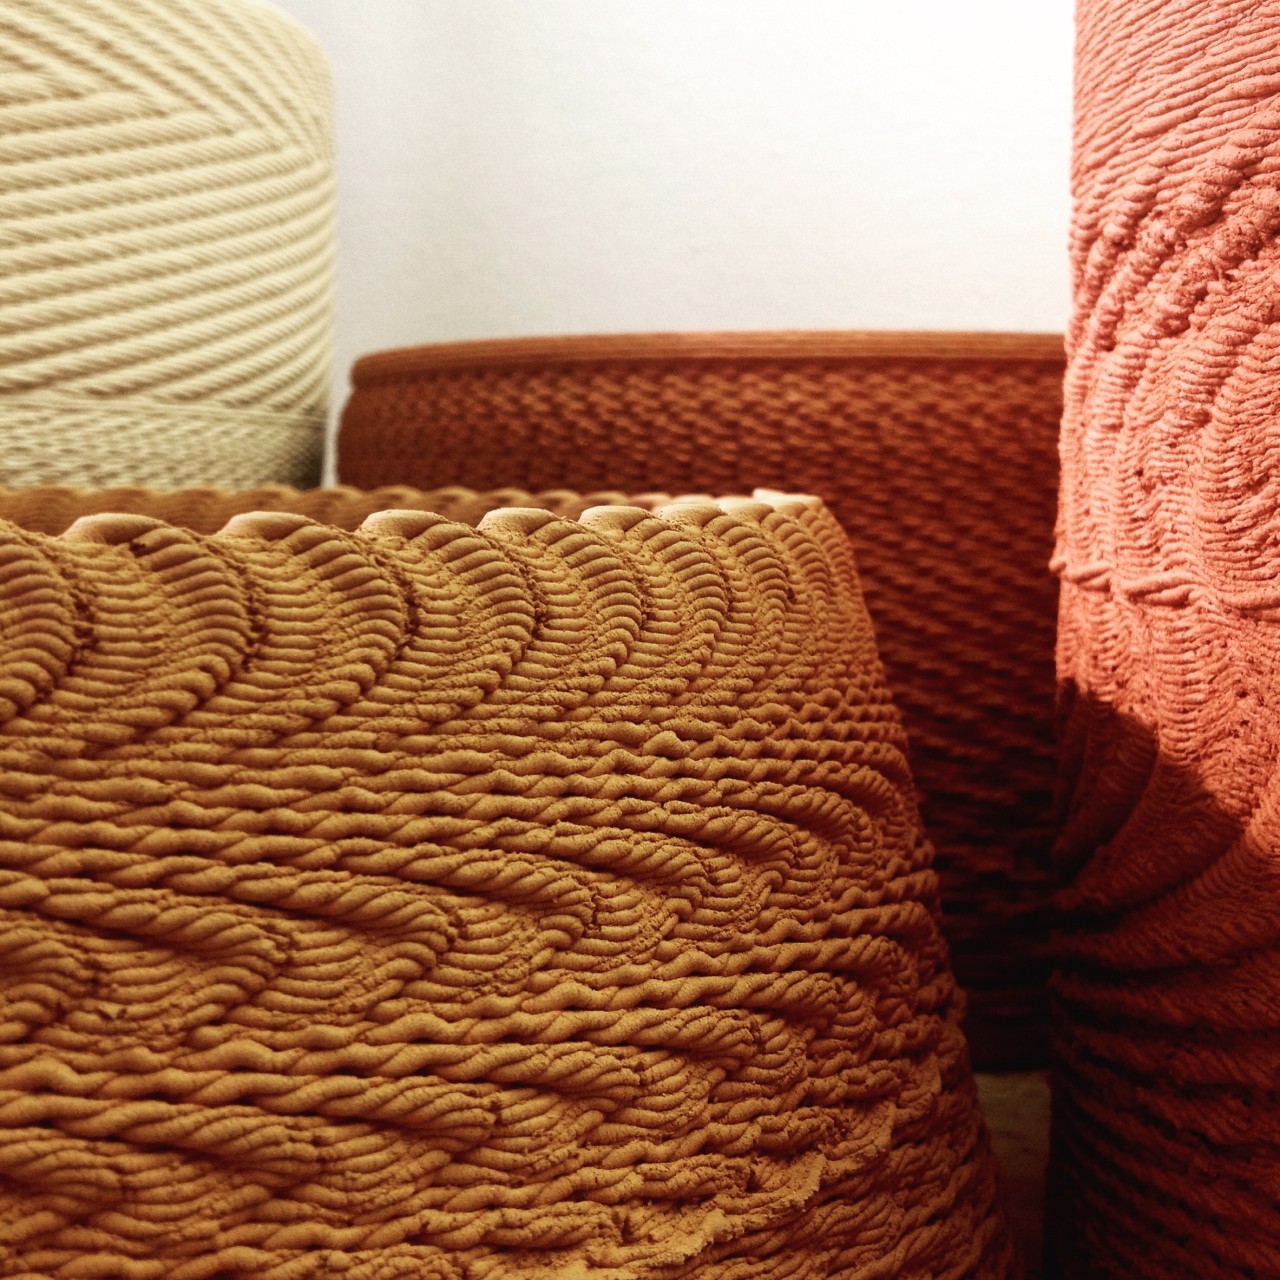 These Ceramics Were 3D Printed Using Music and Sound Waves